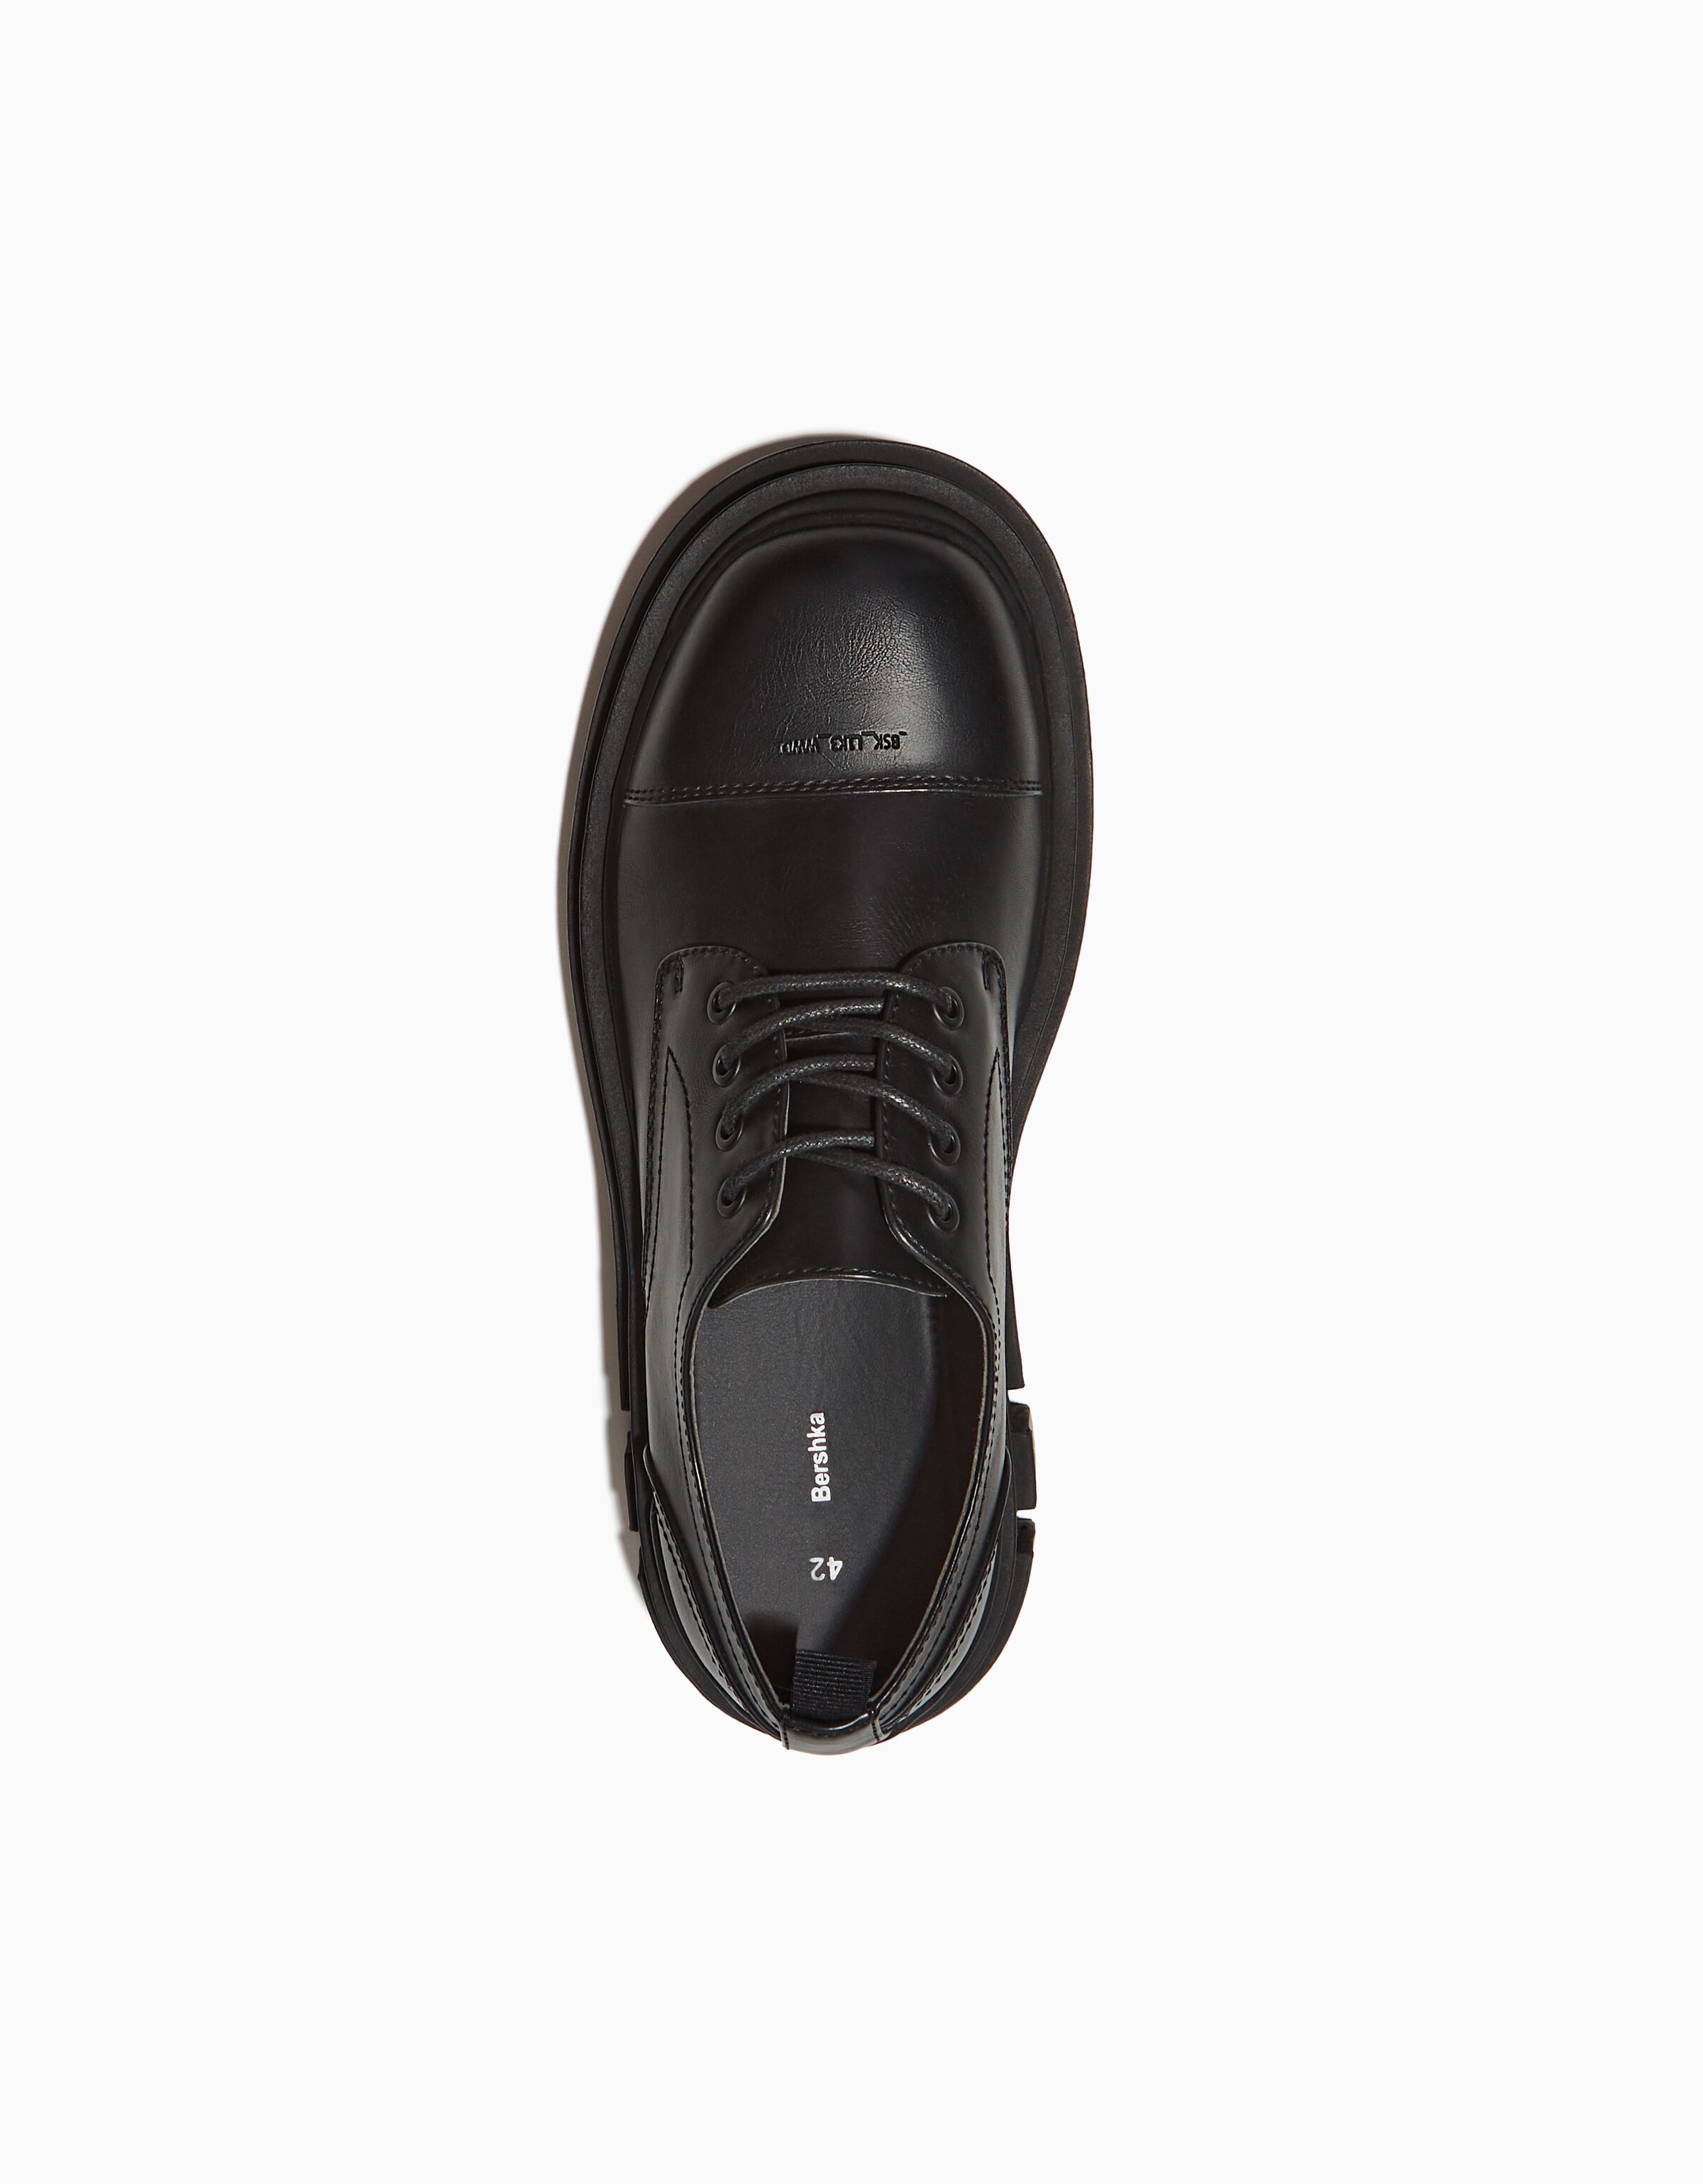 Men’s dress shoes with track soles